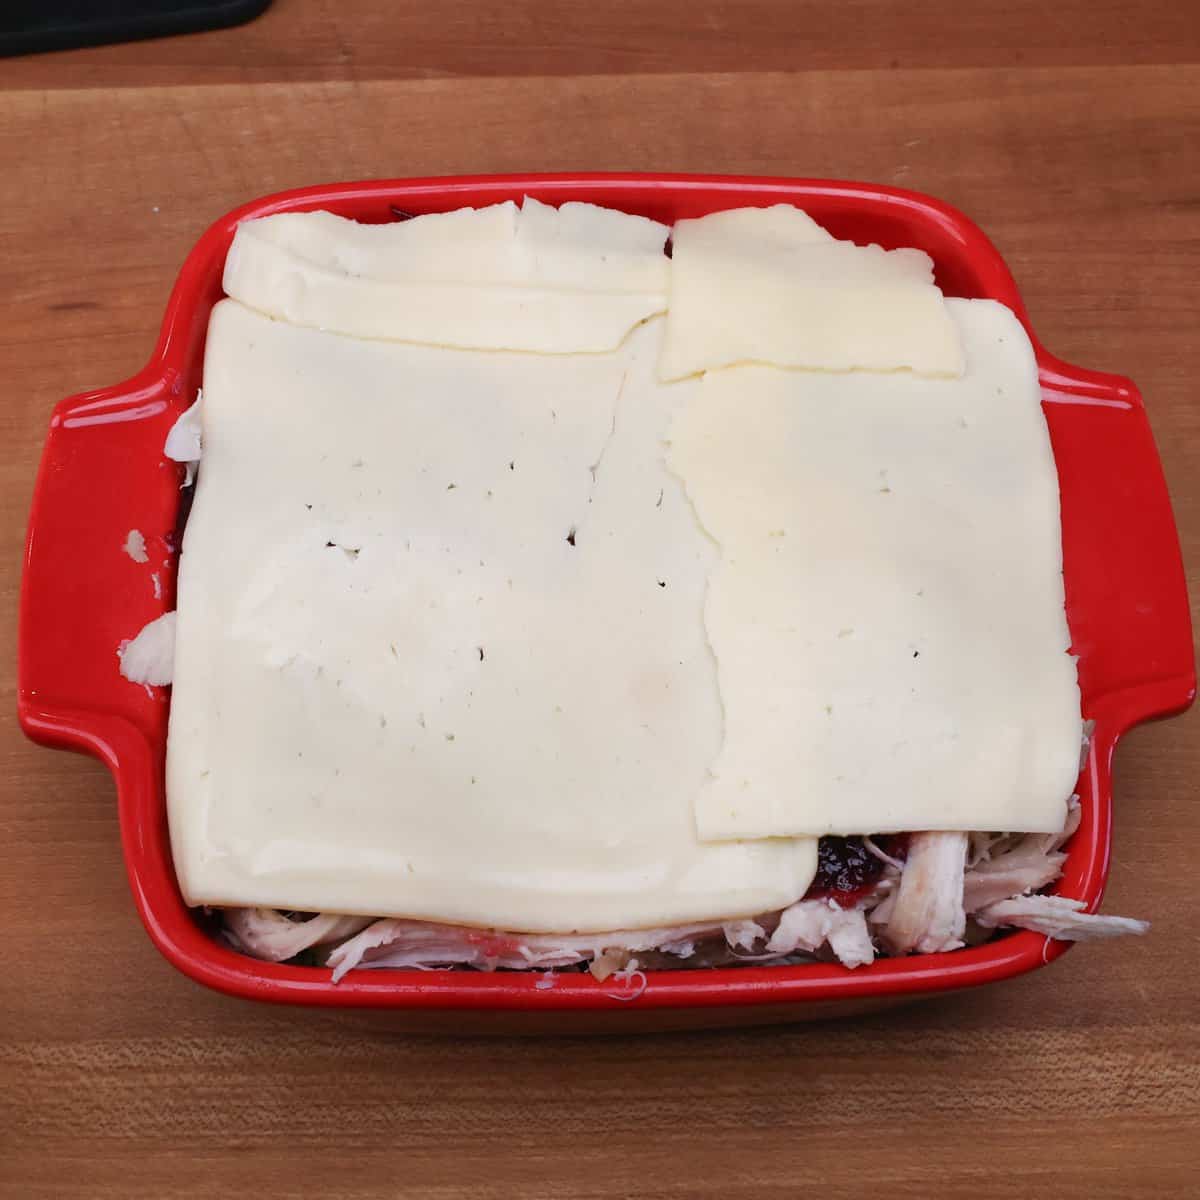 slices of cheese on top of turkey, stuffing, and cranberry sauce in a baking dish.